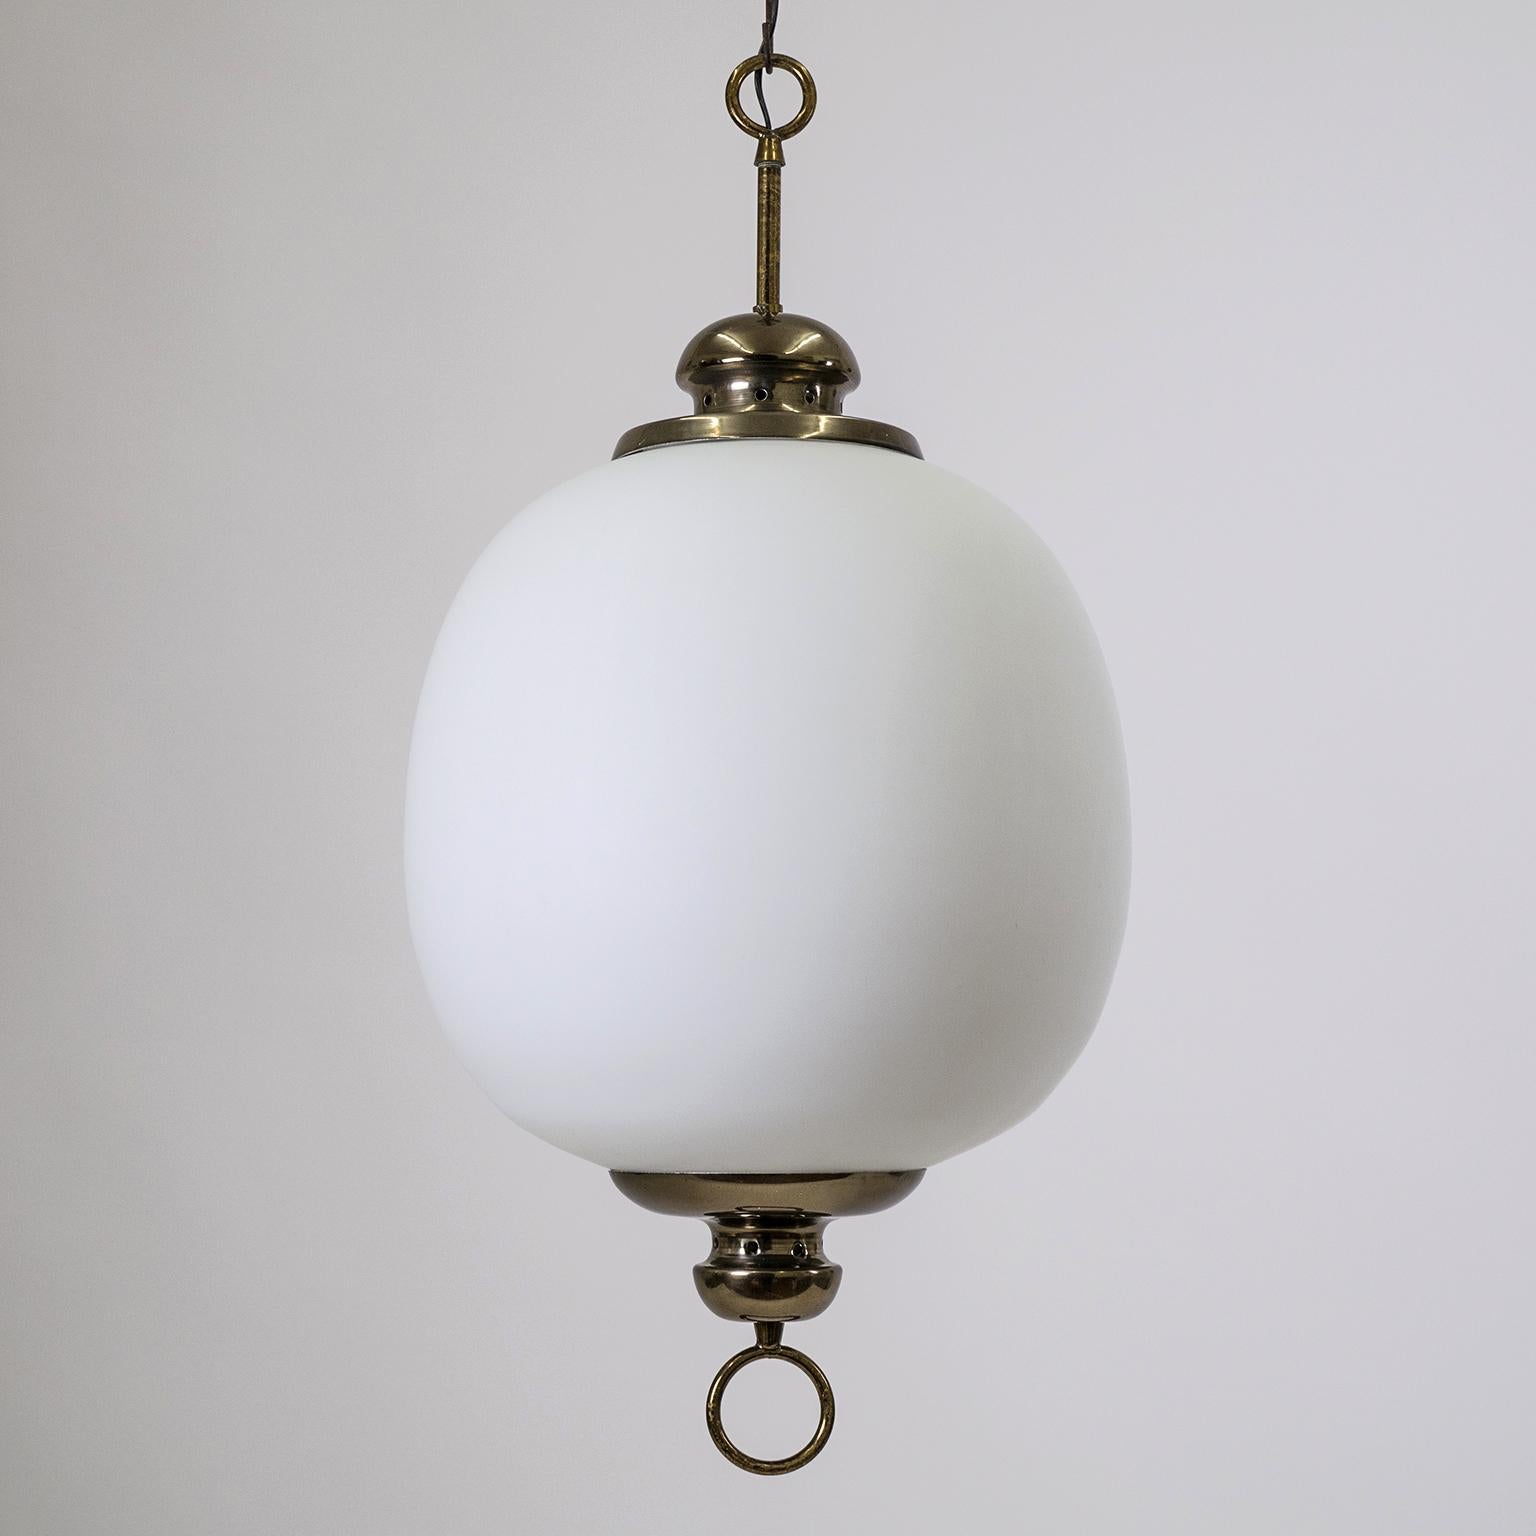 Elegant Italian satin glass pendant from the 1950s with brass and lacquered aluminum hardware. The large blown glass diffuser has a clear inner and opaque outer layer each with a satin finish for a very soft and even light. One brass and ceramic E27